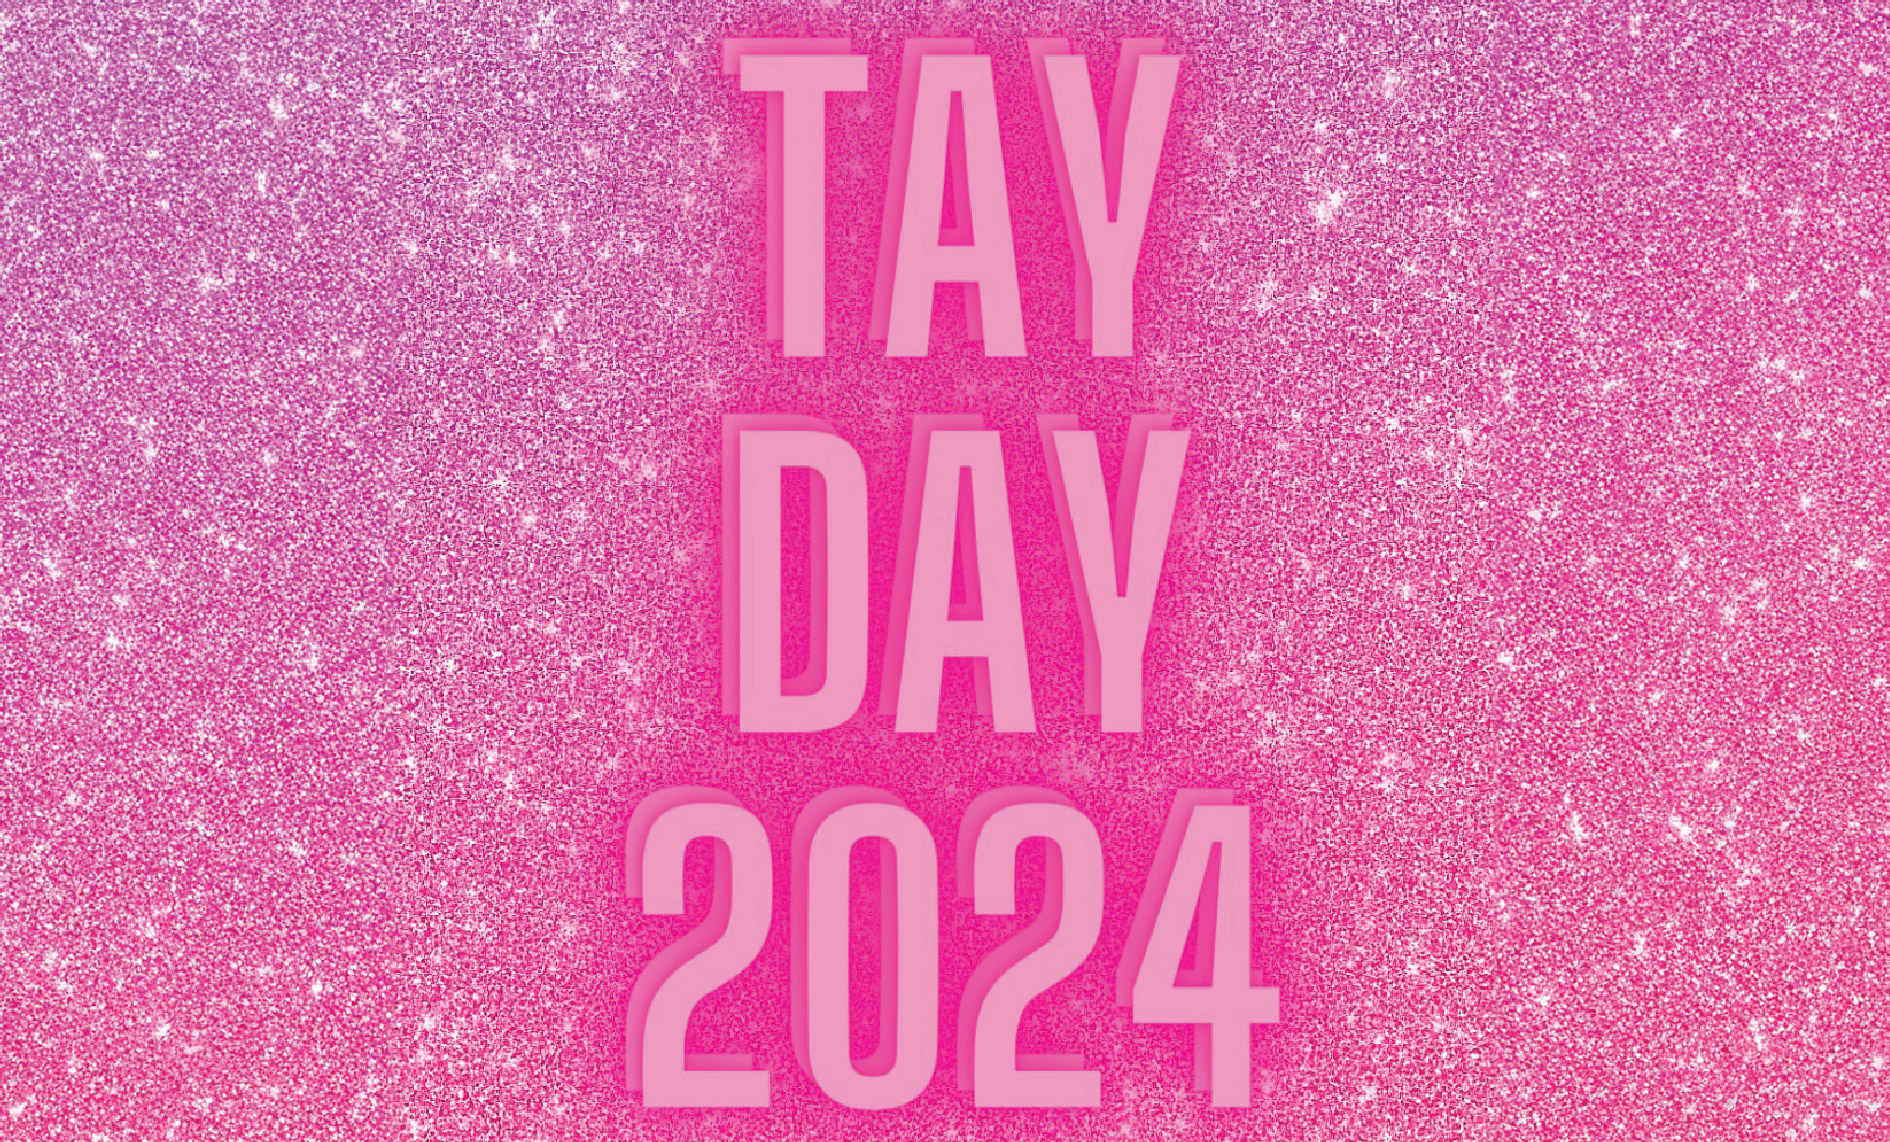 TayDay: A Special Taylor Swift Party